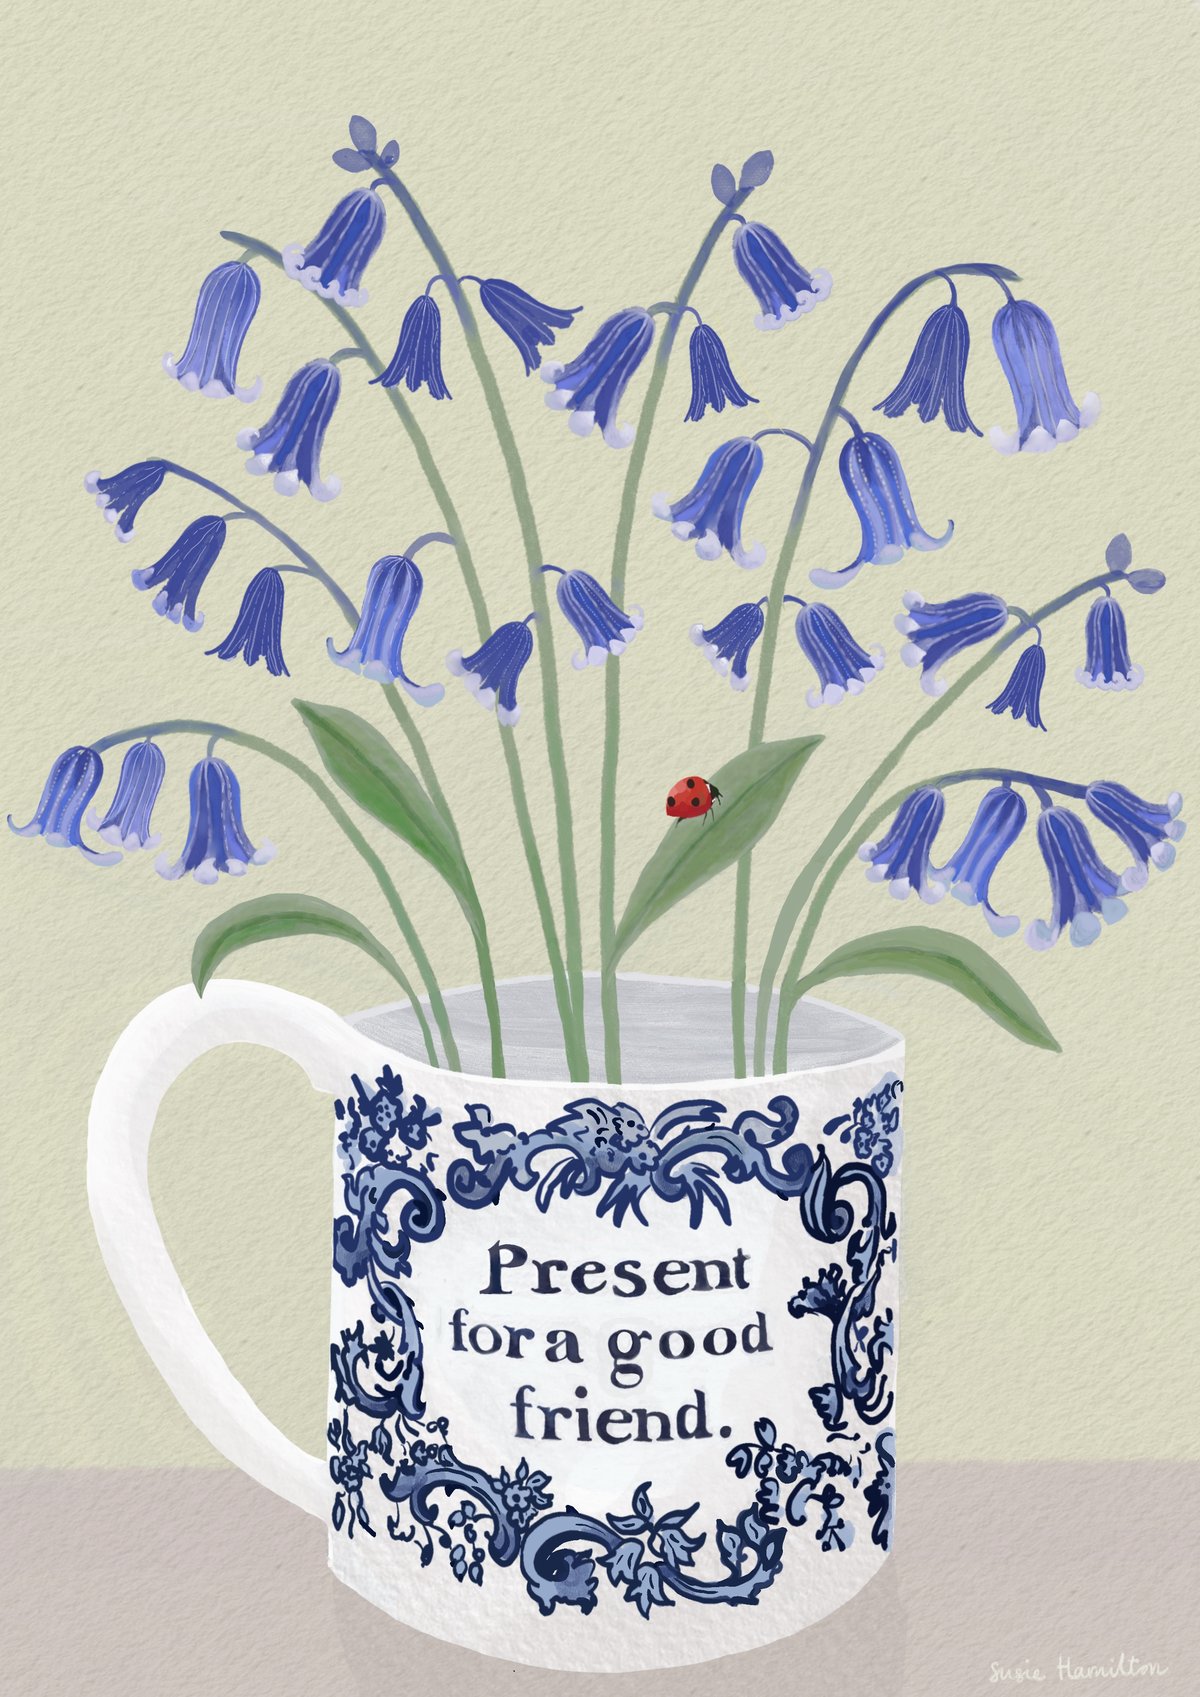 Bluebells in Friendship Cup Print & Card